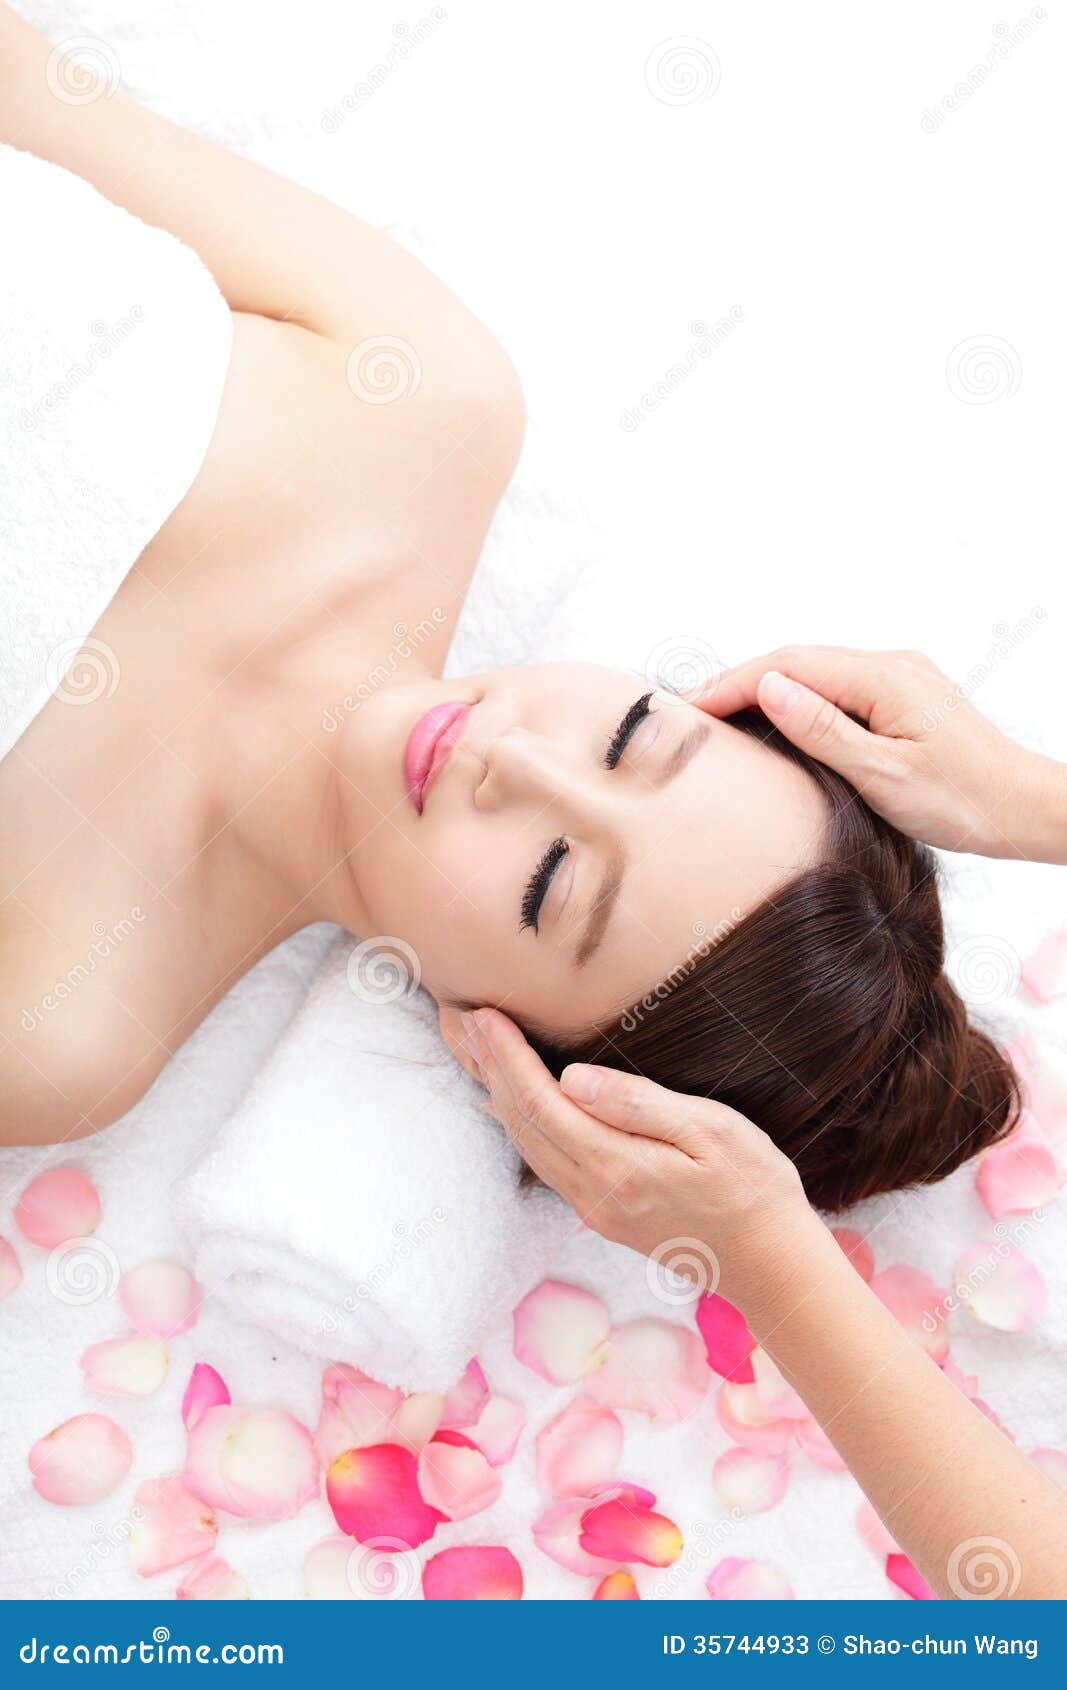 Woman Enjoy Receiving Face Massage At Spa With Roses Stock Image